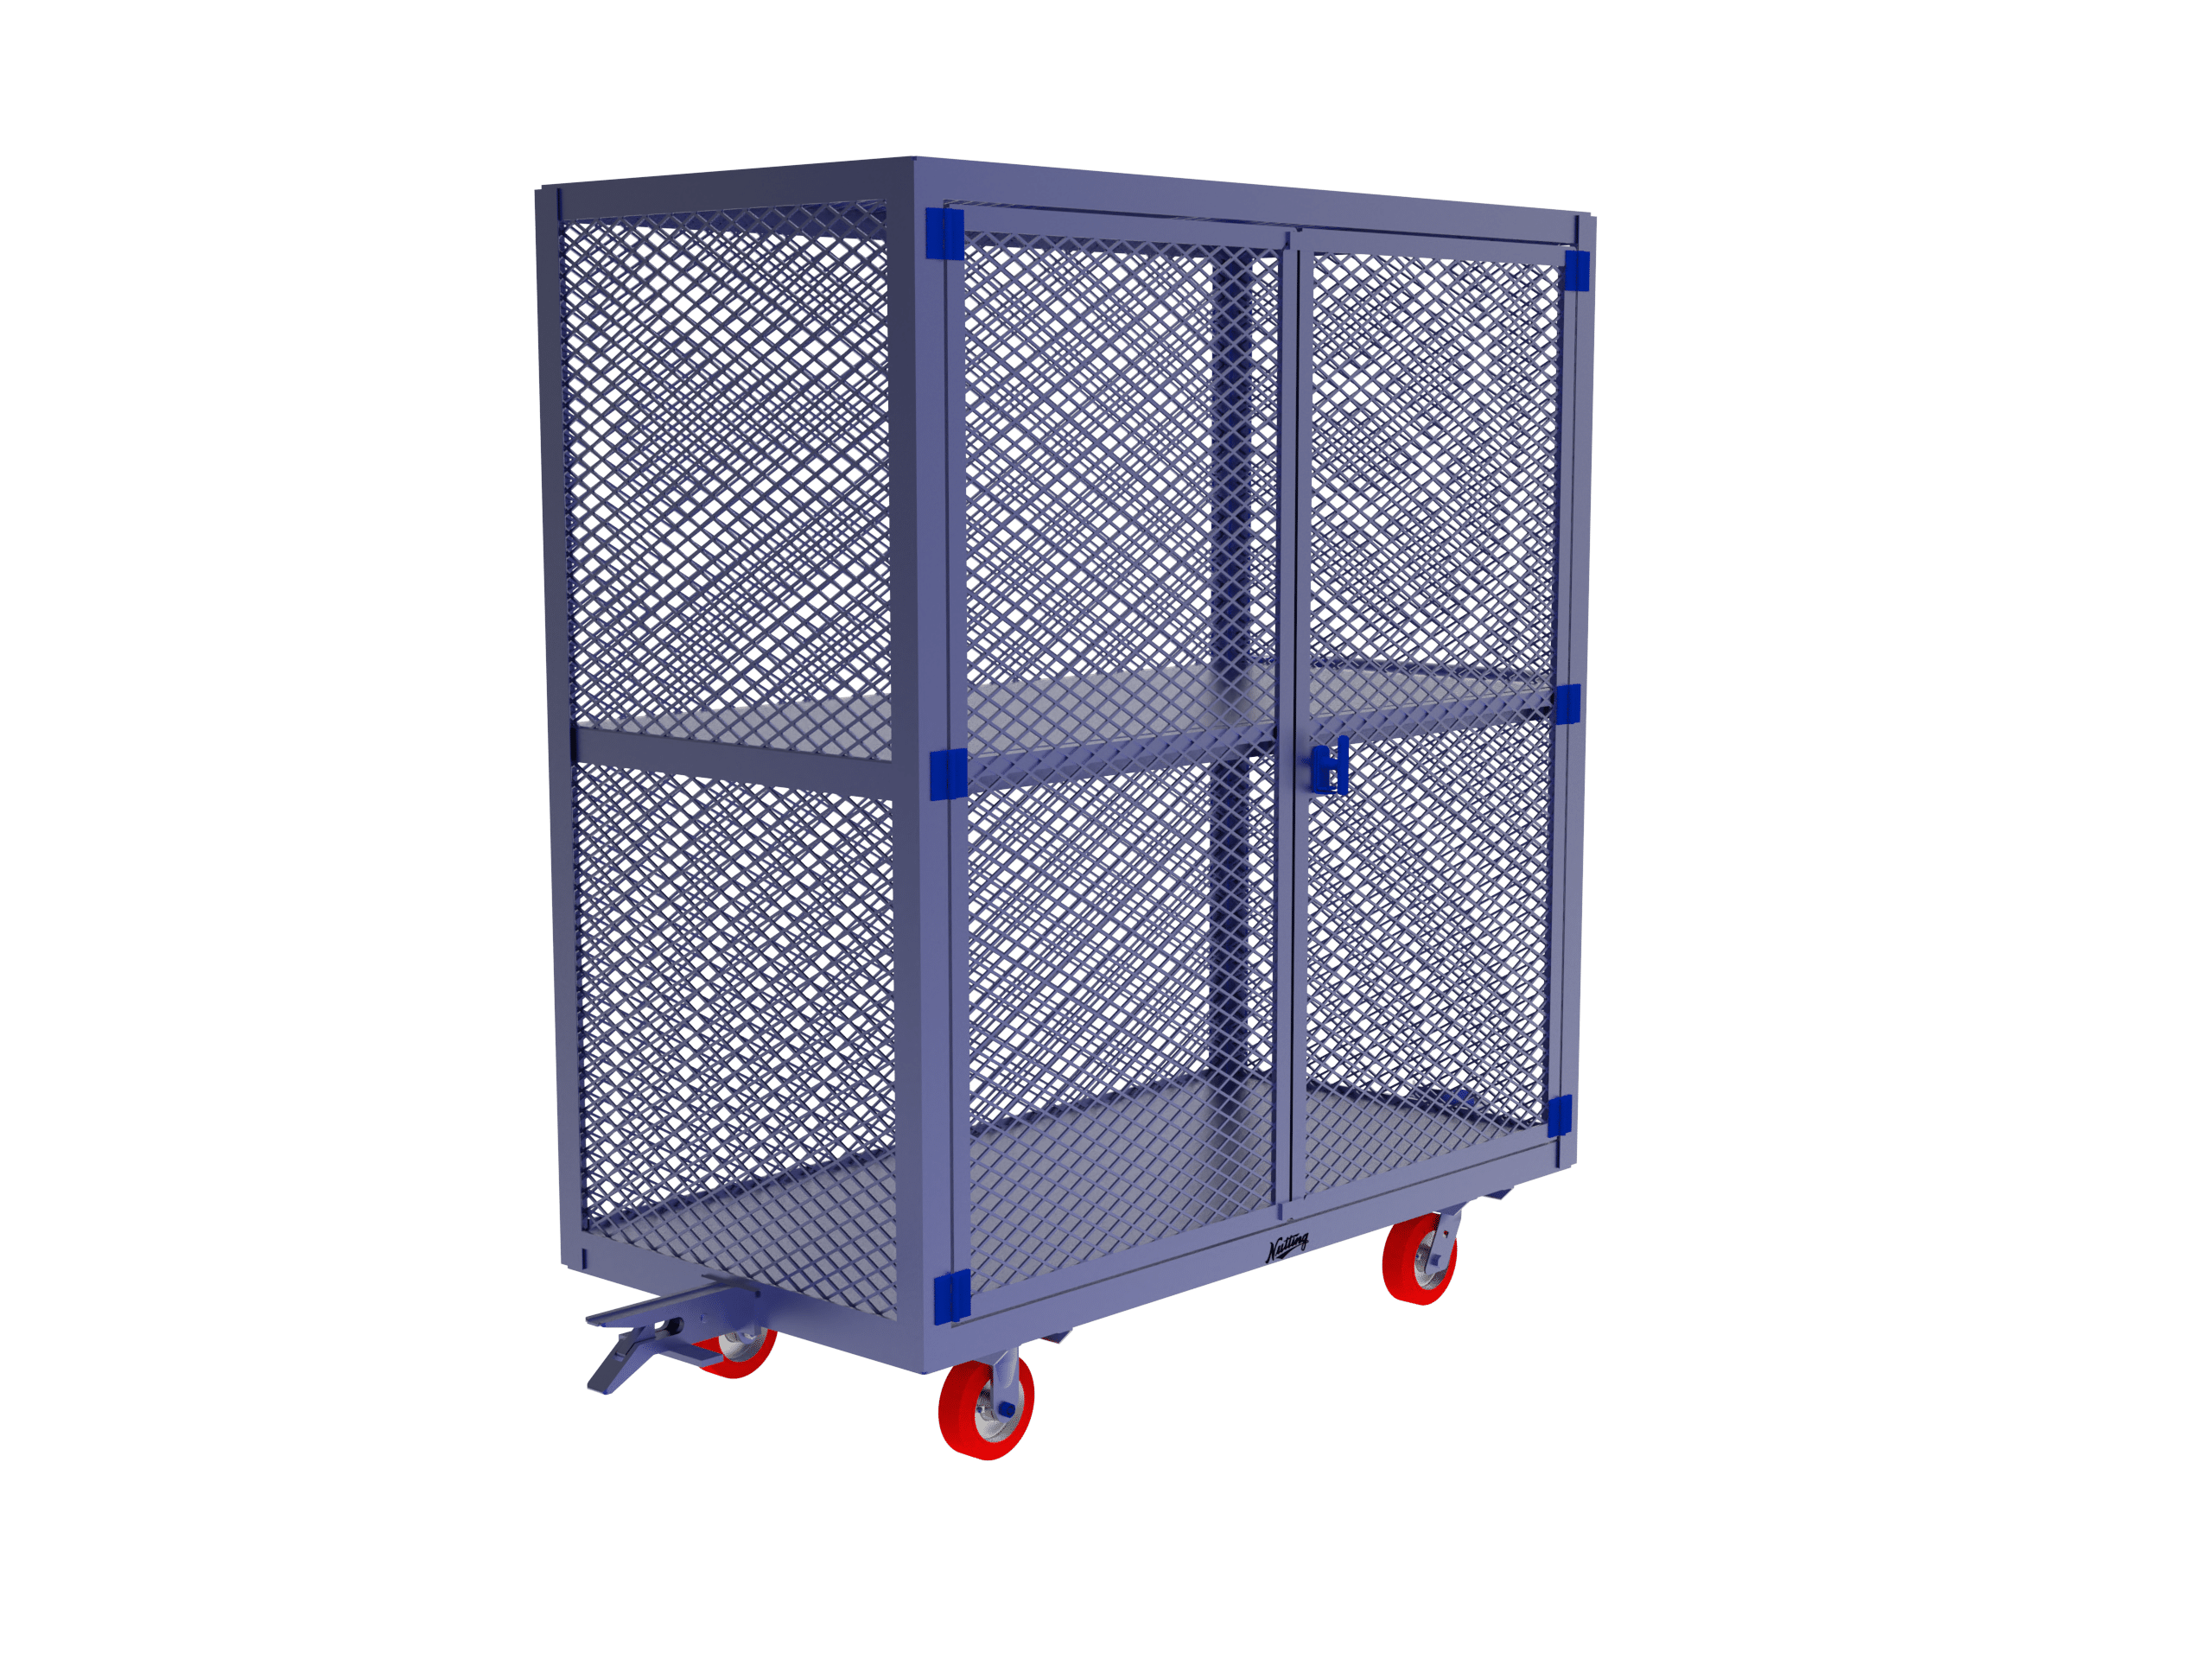 Enclosed shelf carts keep boxes and goods safe from falling out and damaging products.